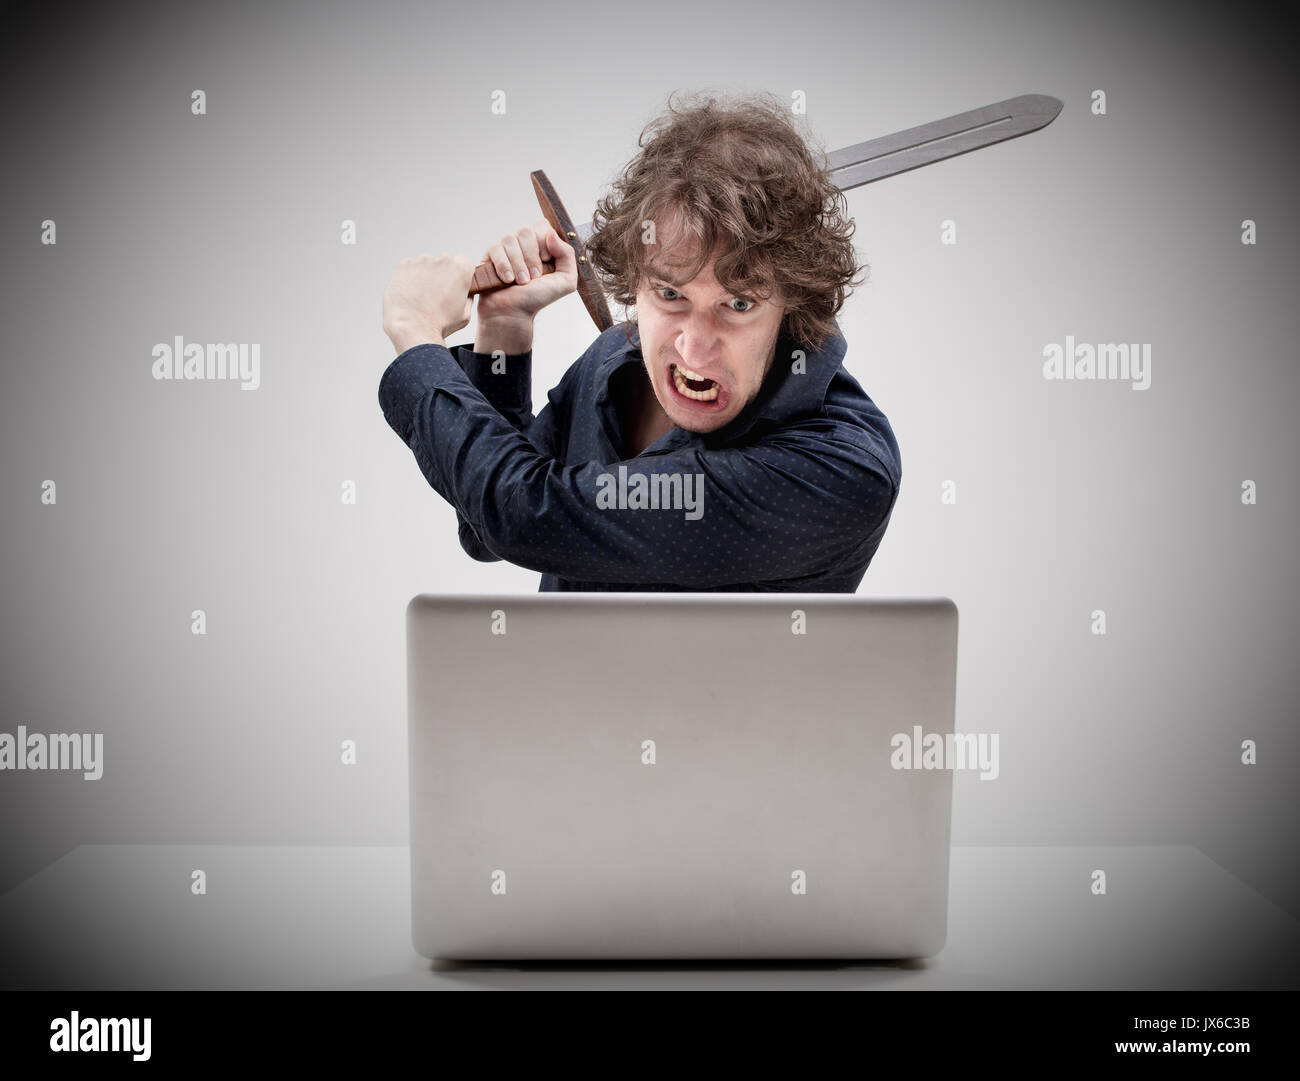 angry man about to destroy his laptop computer by hitting it with a medieval sword with an intense expression of rage - concept of computer hassles an Stock Photo